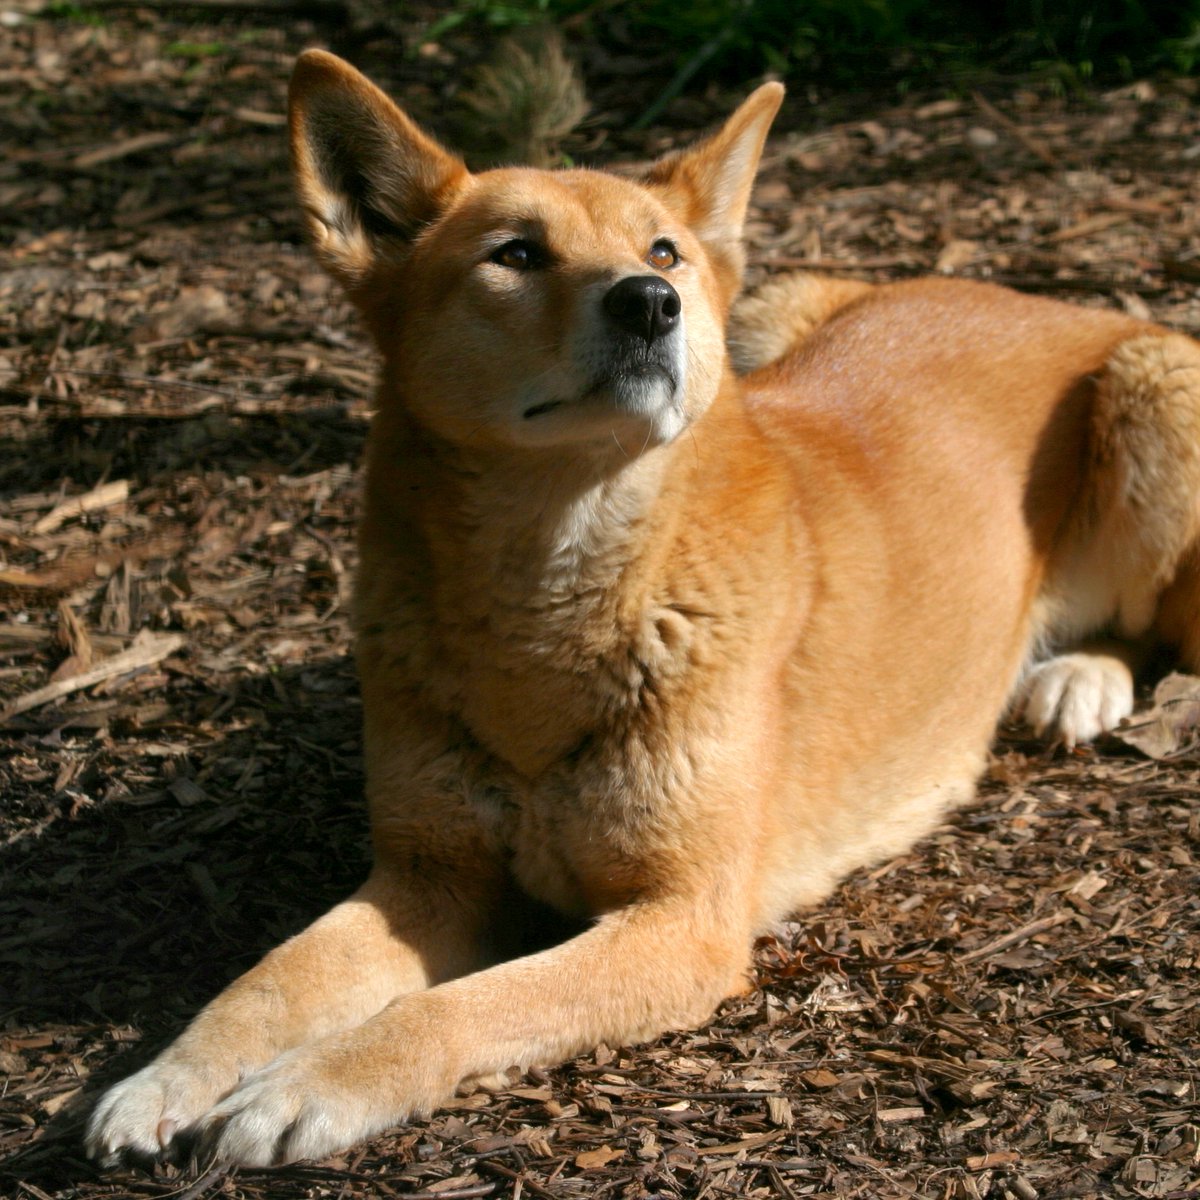 Apex predators are long distance dispersers of #mycorrhizal fungi! Find our new paper on #dingoes as secondary mycophagists:

publish.csiro.au/WR/WR22057

#Apexpredators #PredatorEcology #truffles #mycology #fungi #mushrooms #mycophagy @KarlVernes @DingoResearch @Redfoxmeek @hpmilne